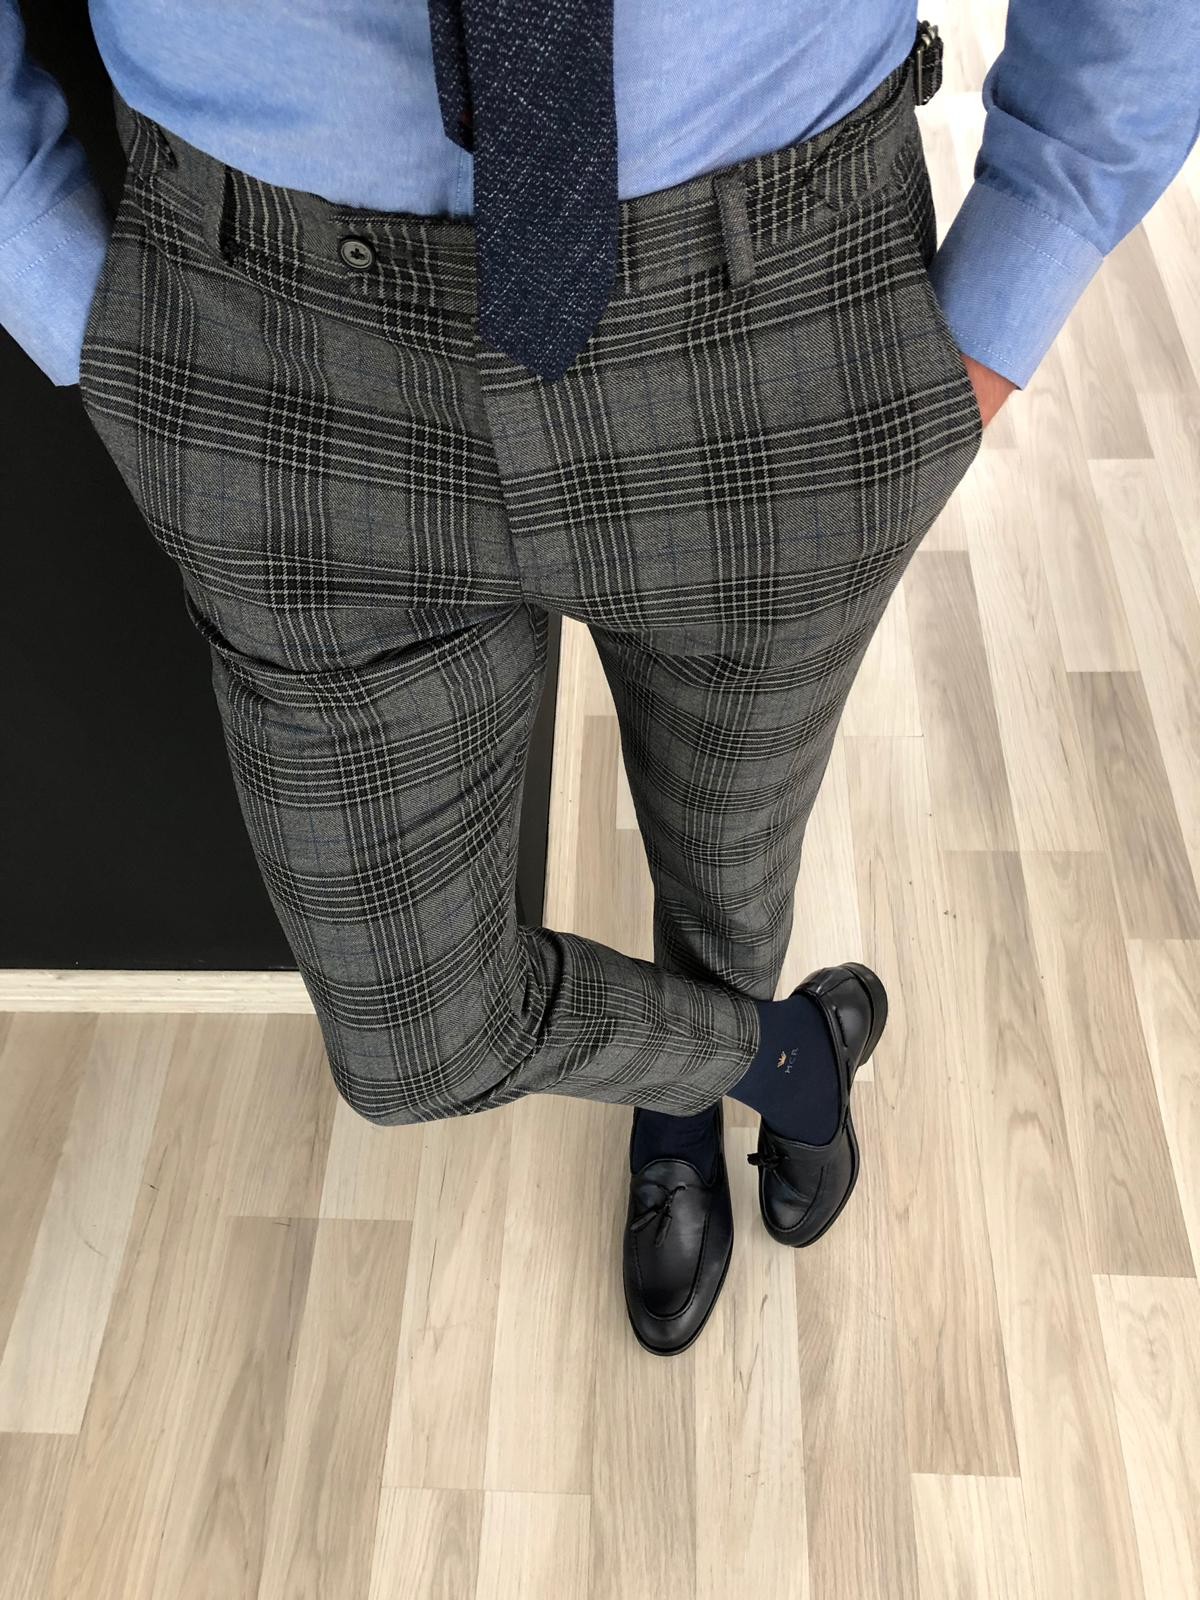 Buy Gray Slim Fit Plaid Pants by Gentwith.com with Free Shipping